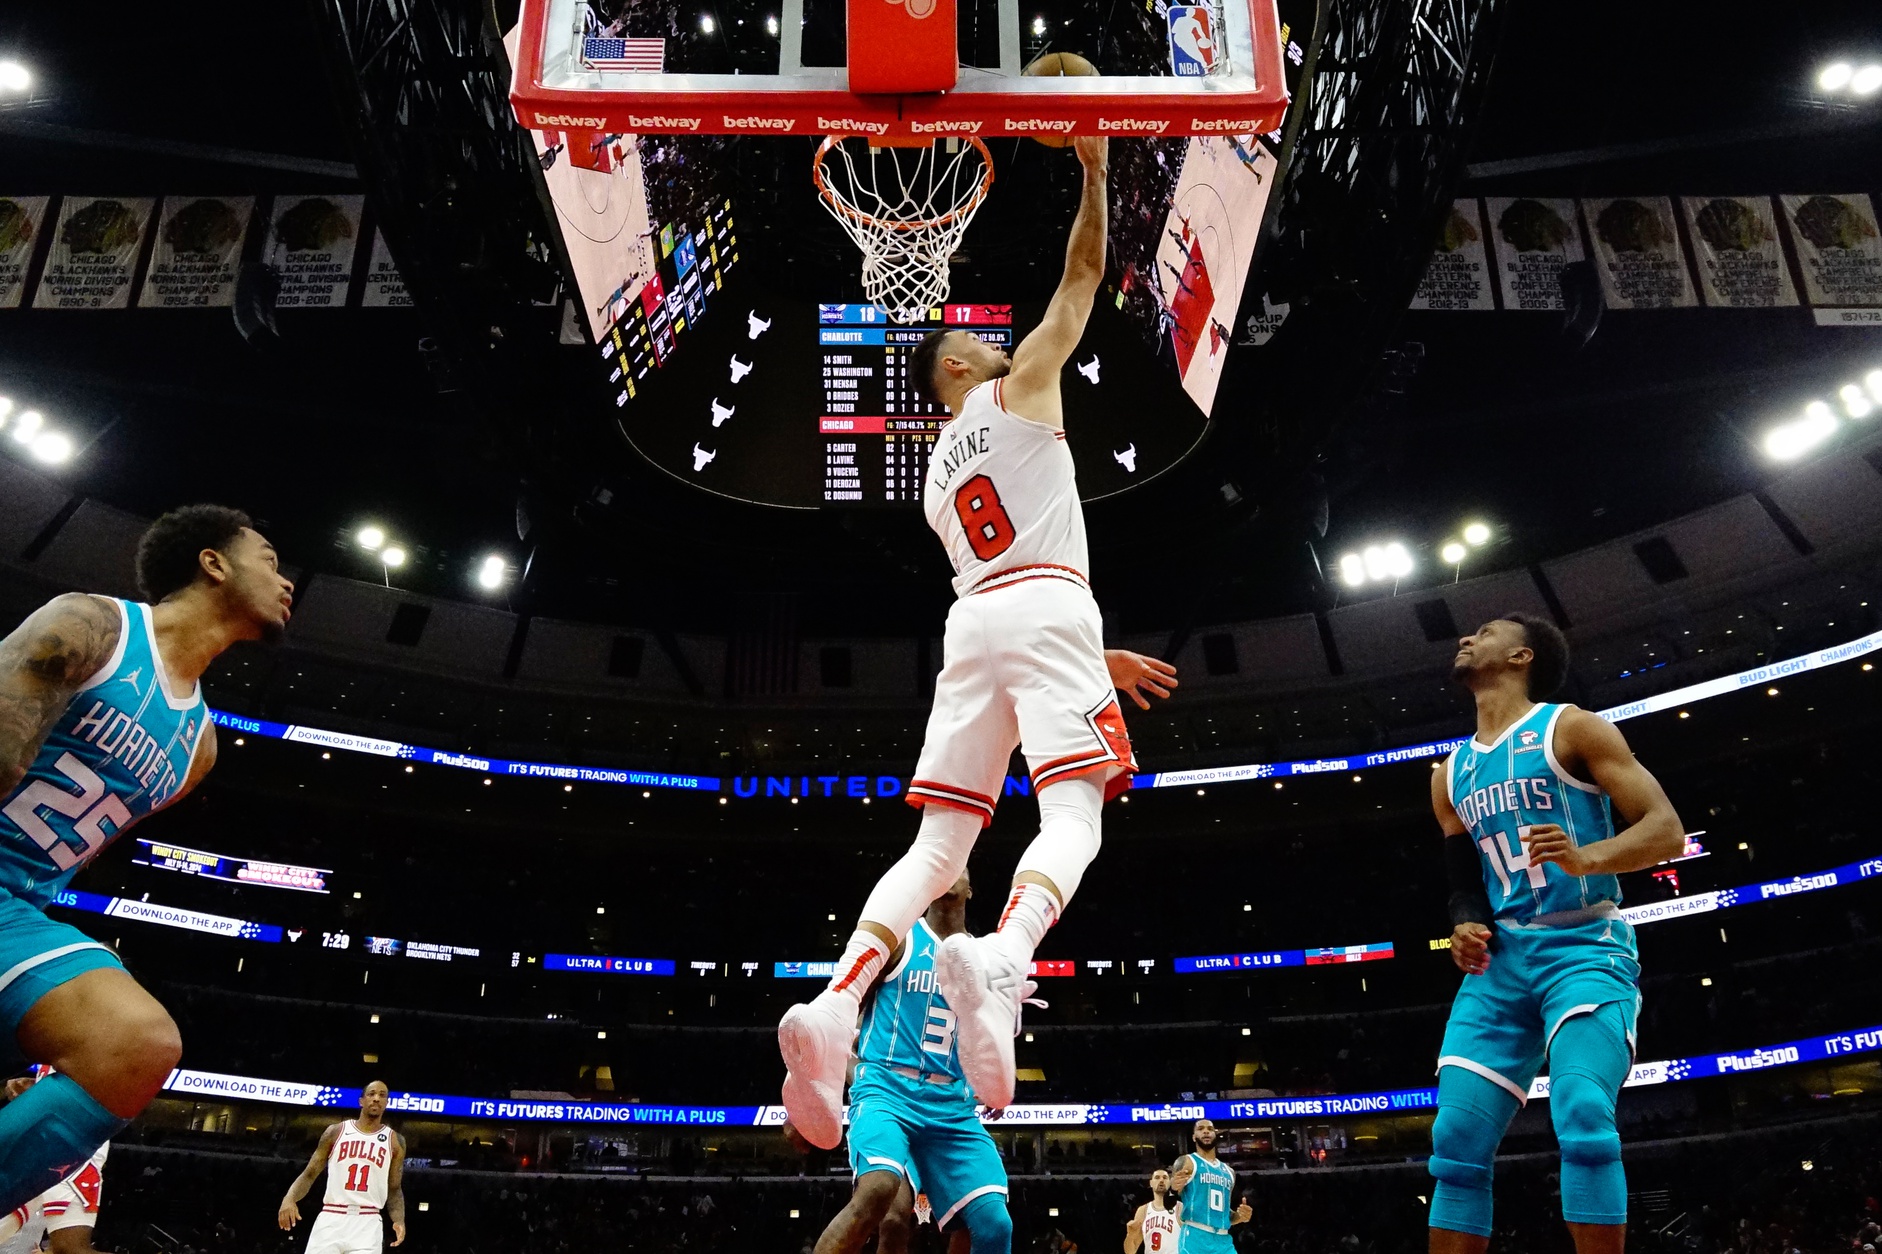 Chicago Bulls guard Zach LaVine (8) shoots a layup against the Charlotte Hornets during the first half at United Center.